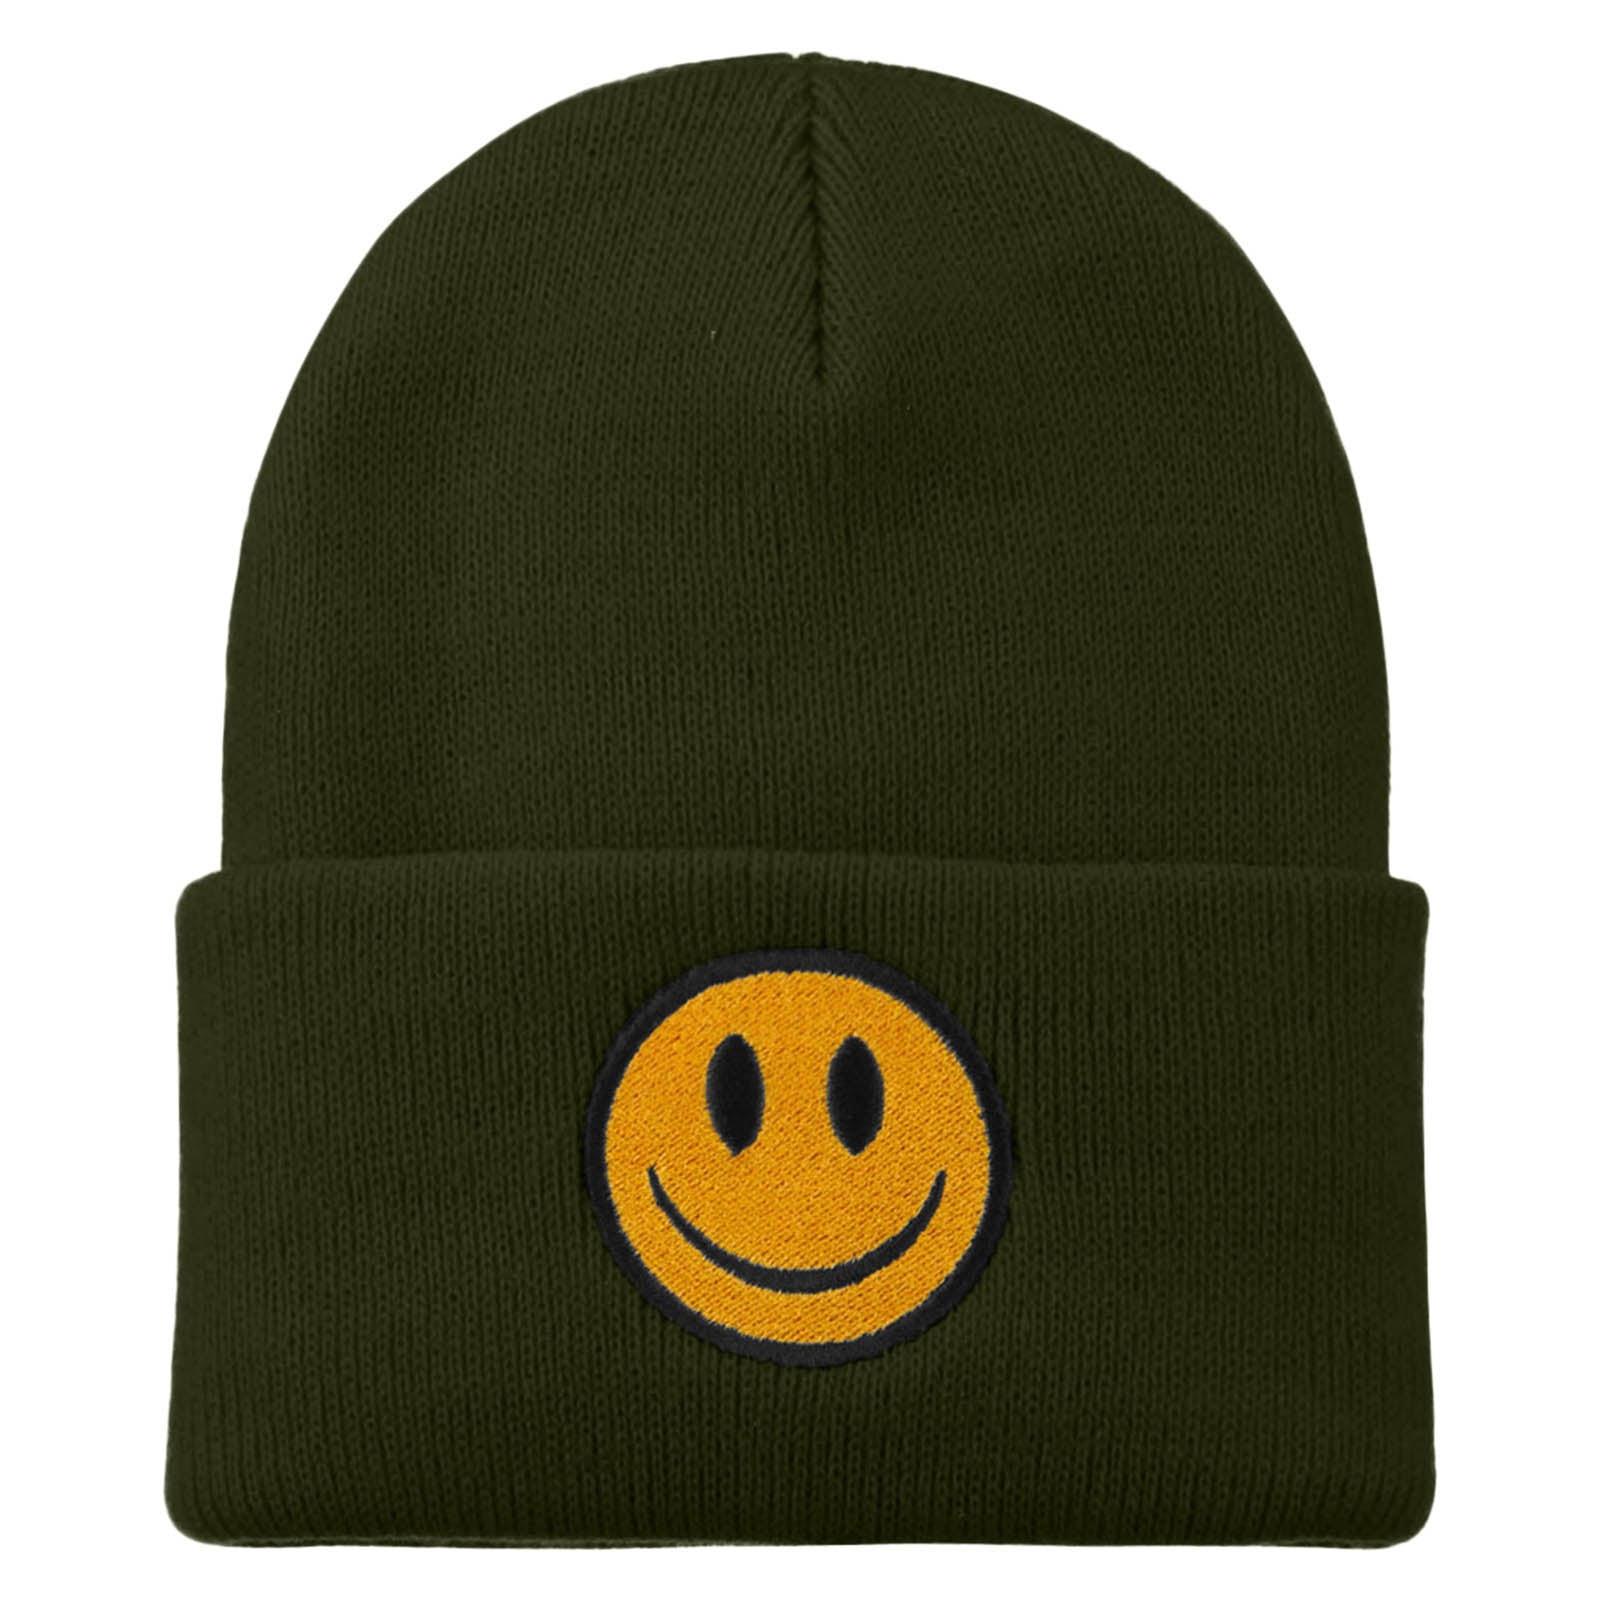 Smile Face Embroidered Long Beanie - Olive OSFM